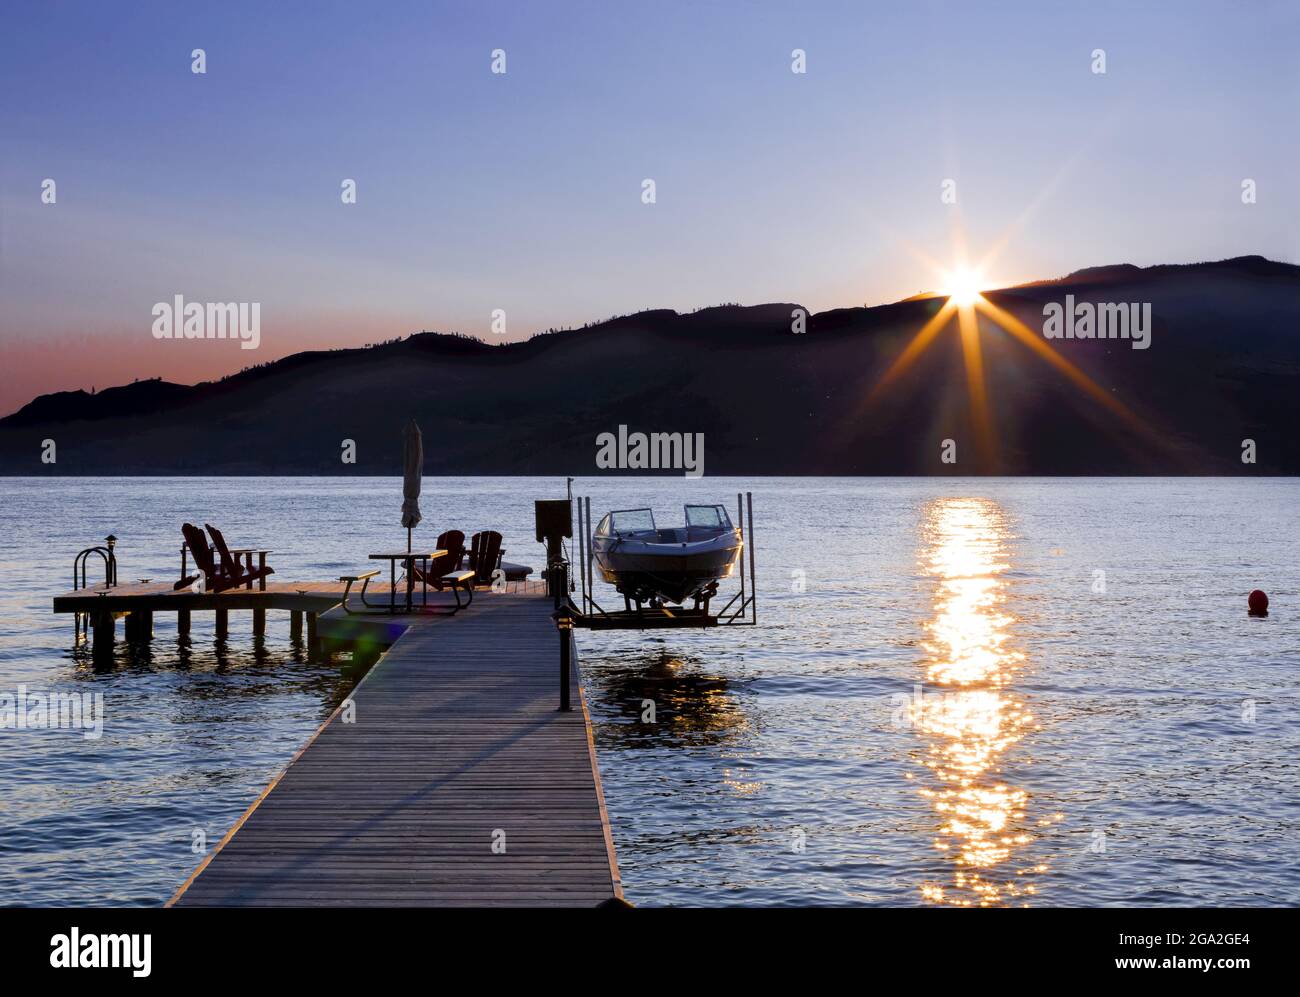 Adirondack chairs and a picnic table sit on a wooden dock with a boat and lift on Okanagan Lake at sunset; British Columbia, Canada Stock Photo